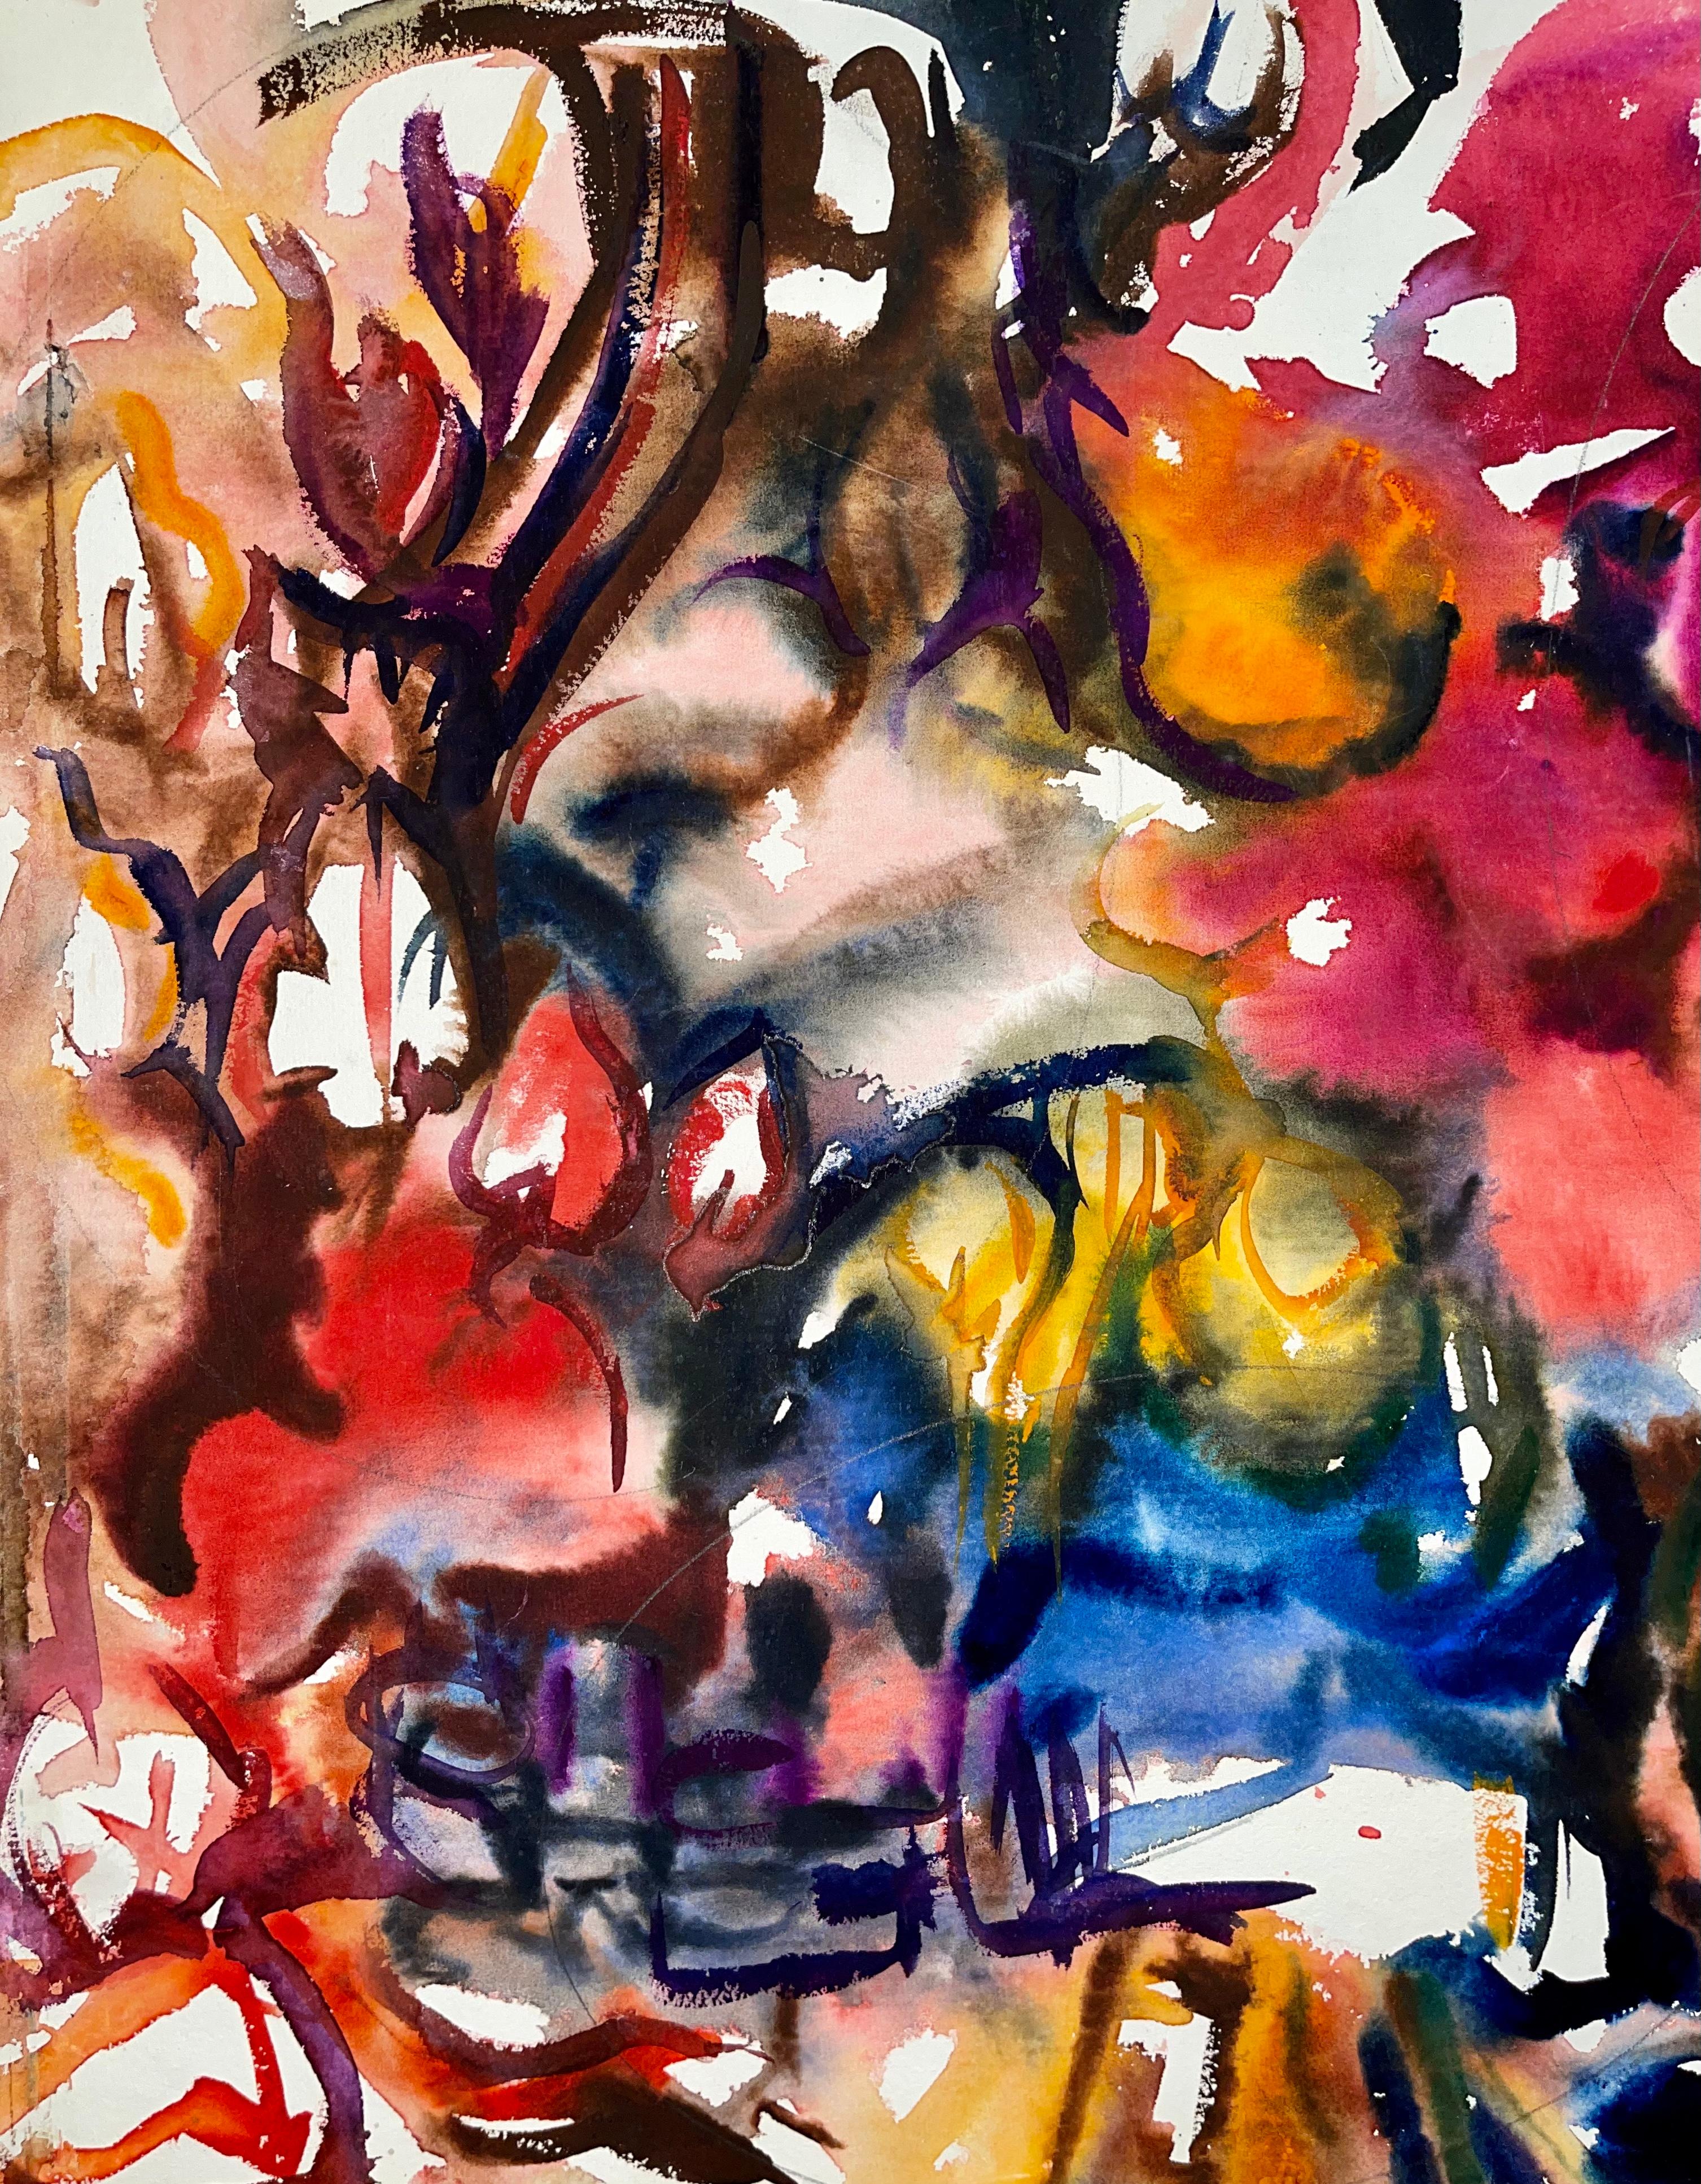 Untitled (Abstract Still Life with Flowers and Fruit) - Painting by Ian Hornak